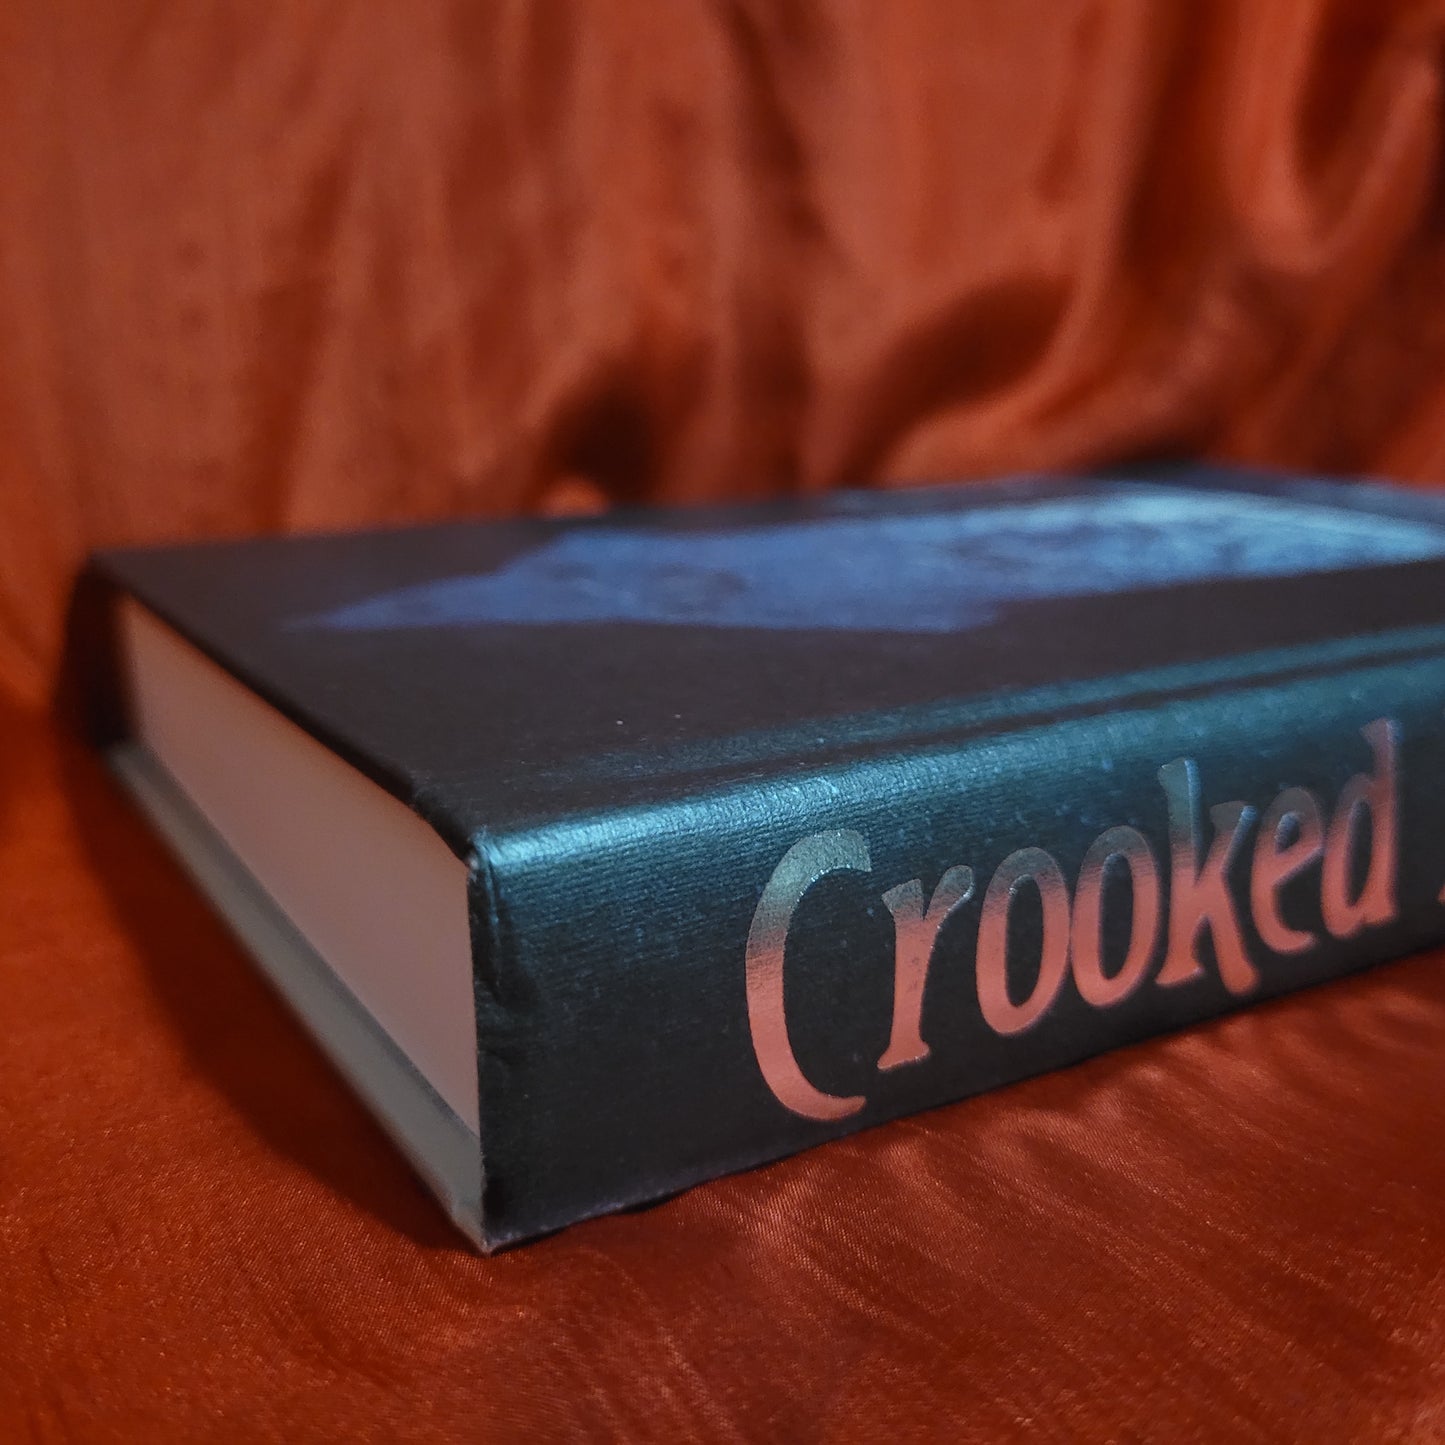 Crooked Houses edited by Mark Beech (Egaeus Press, 2021) Hardcover Second Printing Limited to 250 Copies